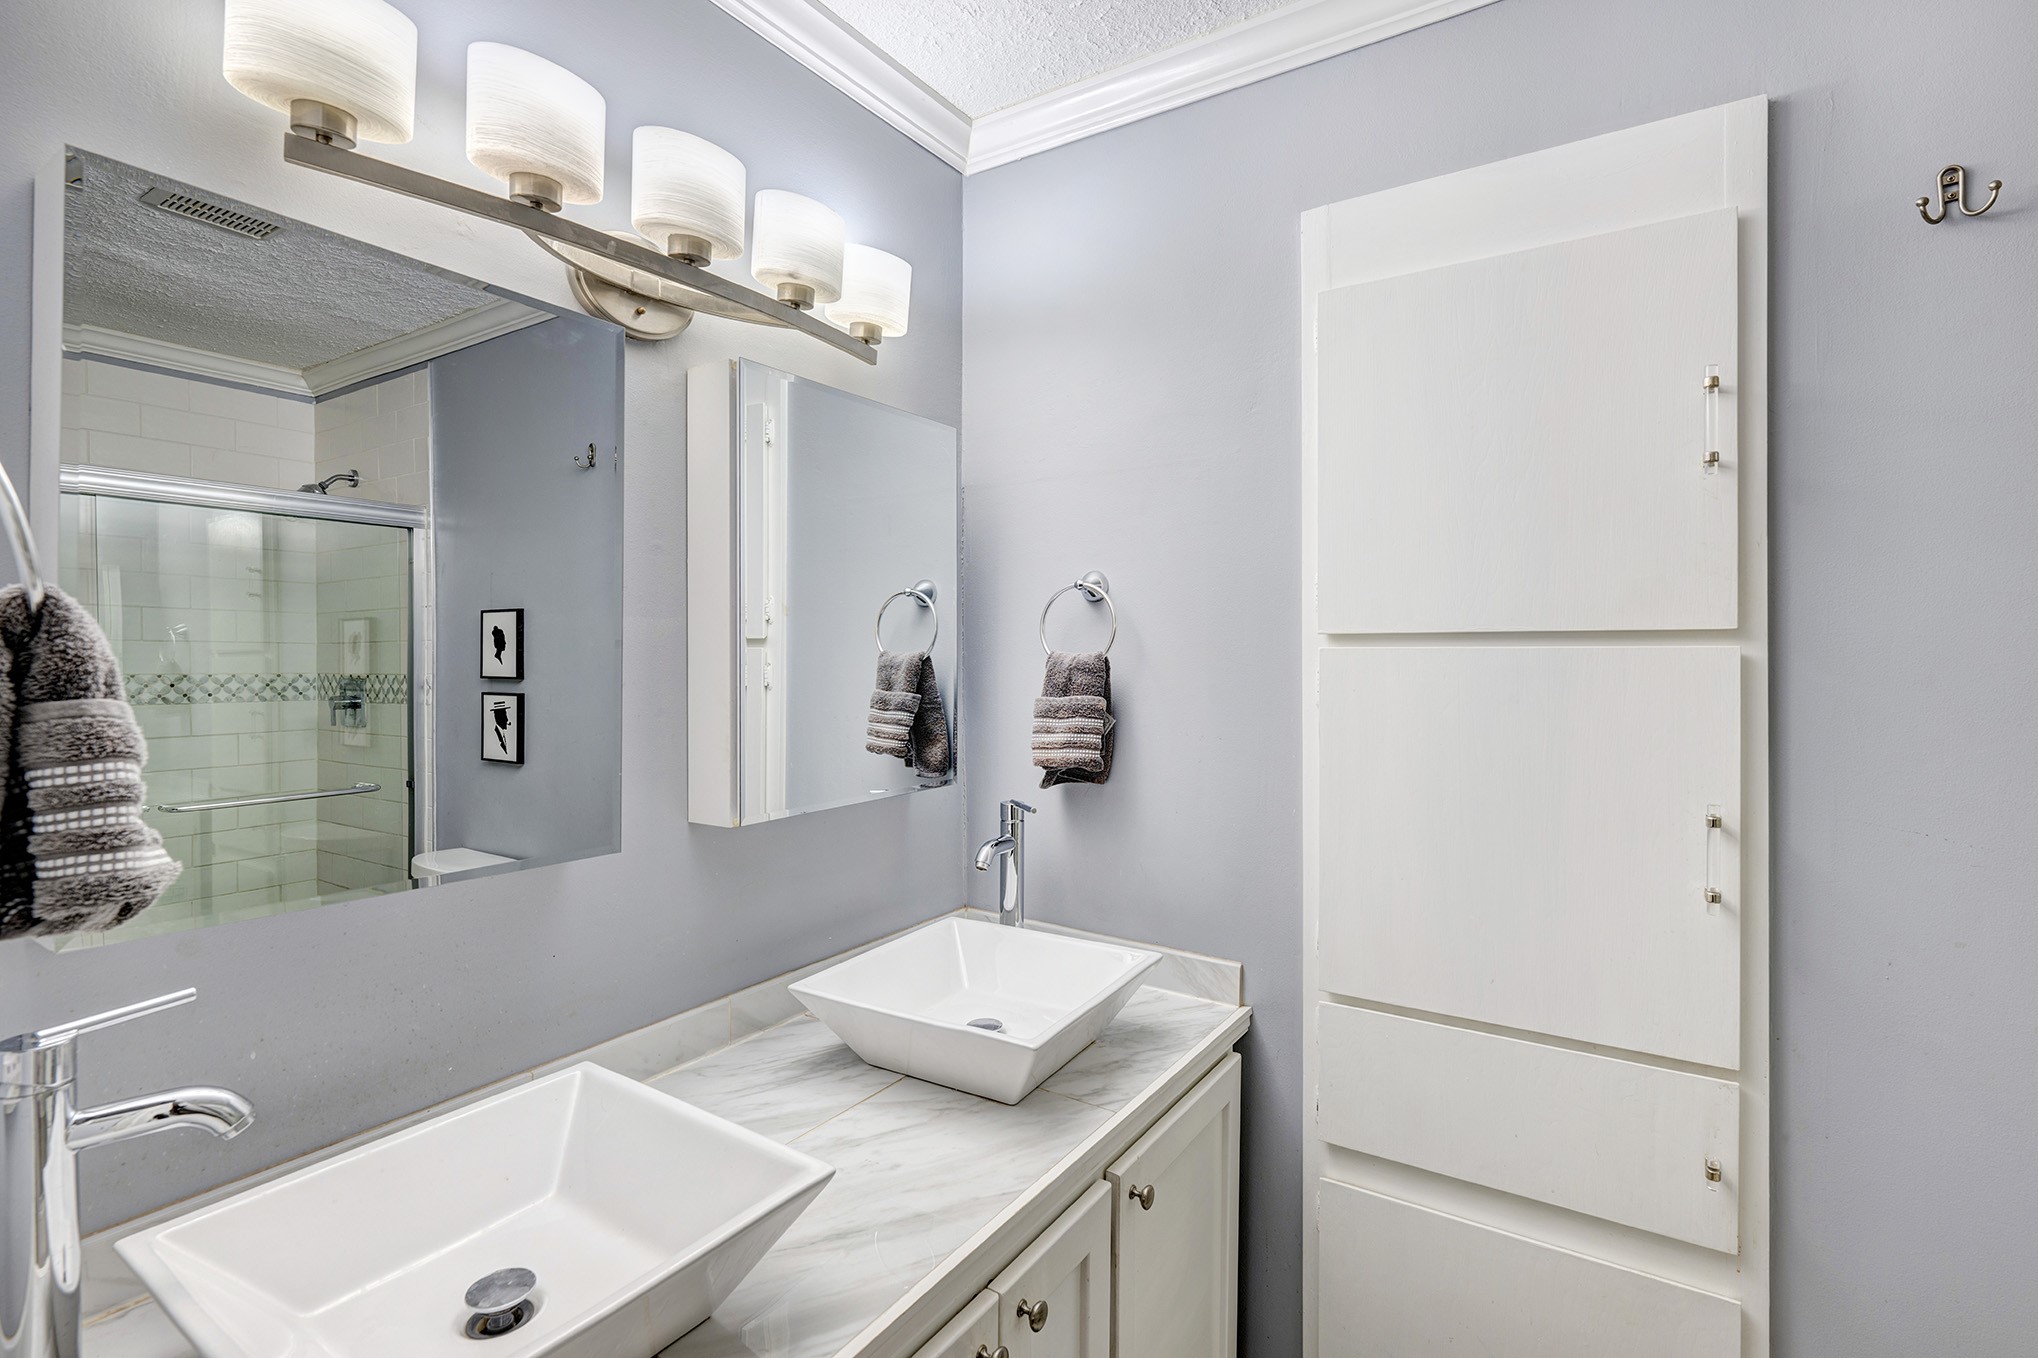 The remodeled primary bathroom showcases a sophisticated dual vanity equipped with exquisite lighting and a spacious walk-in shower enclosed by a sleek sliding glass door.